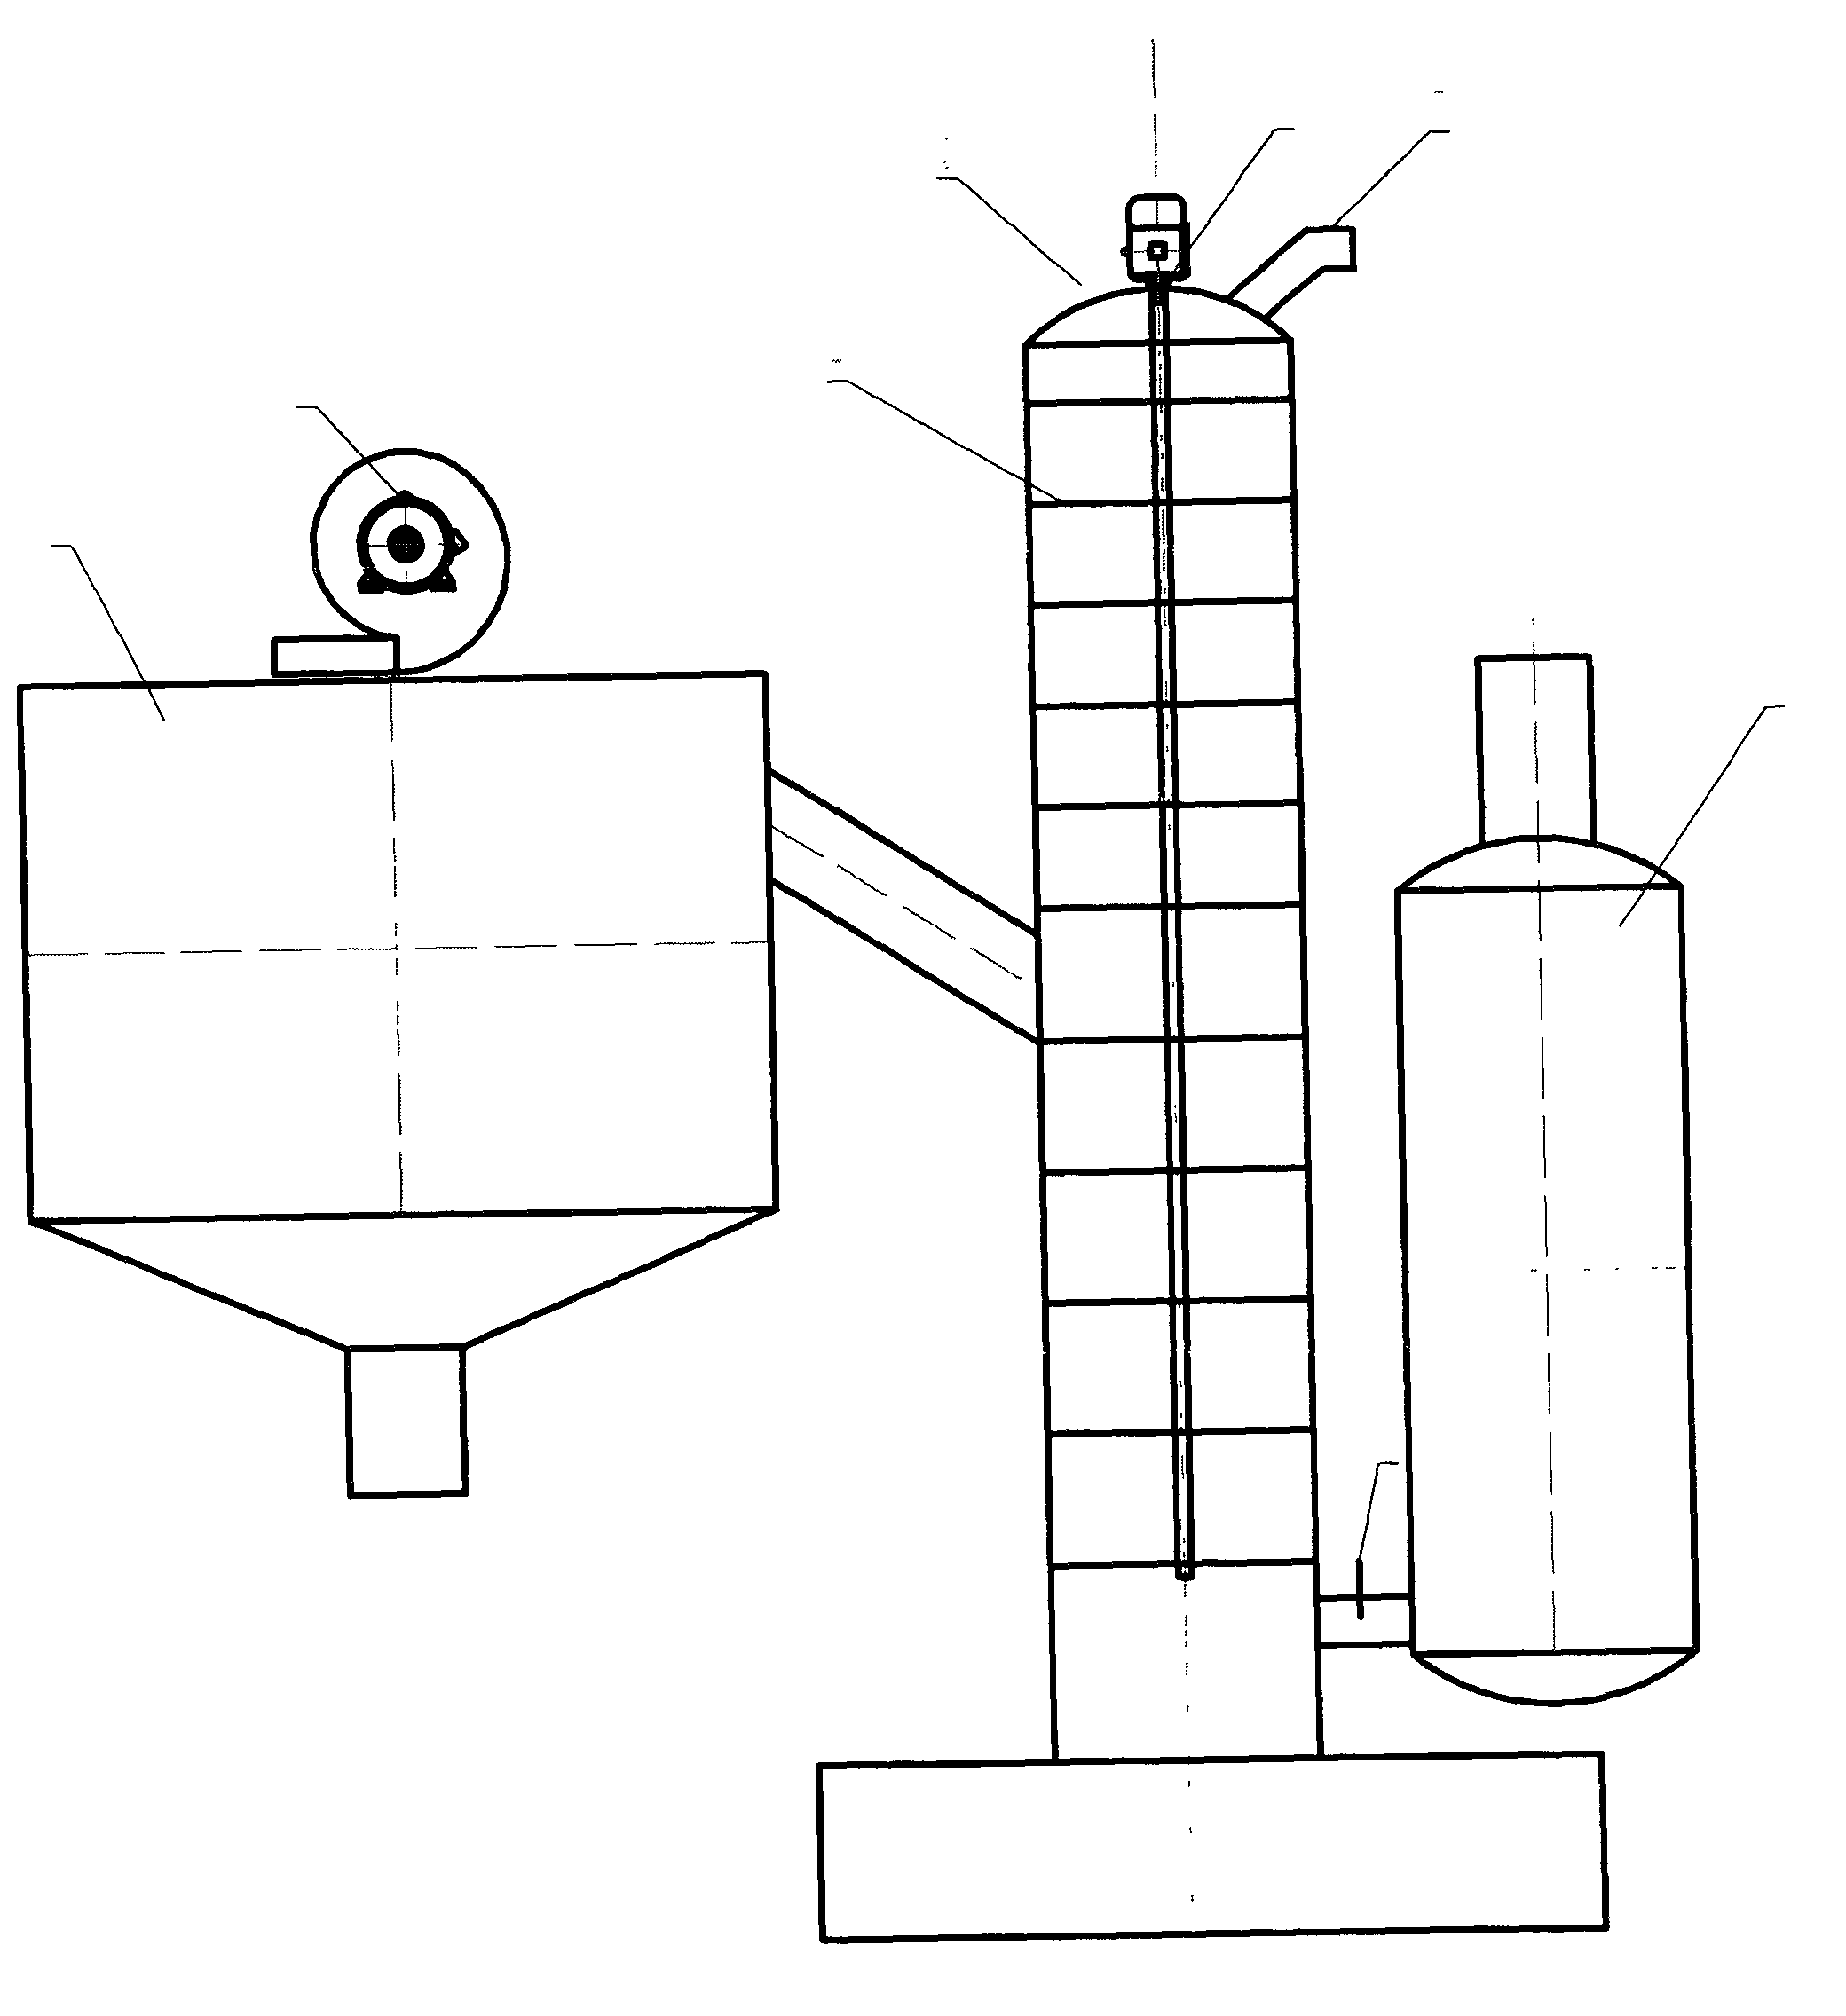 Full-automatic device for quickly drying desulfurized gypsum